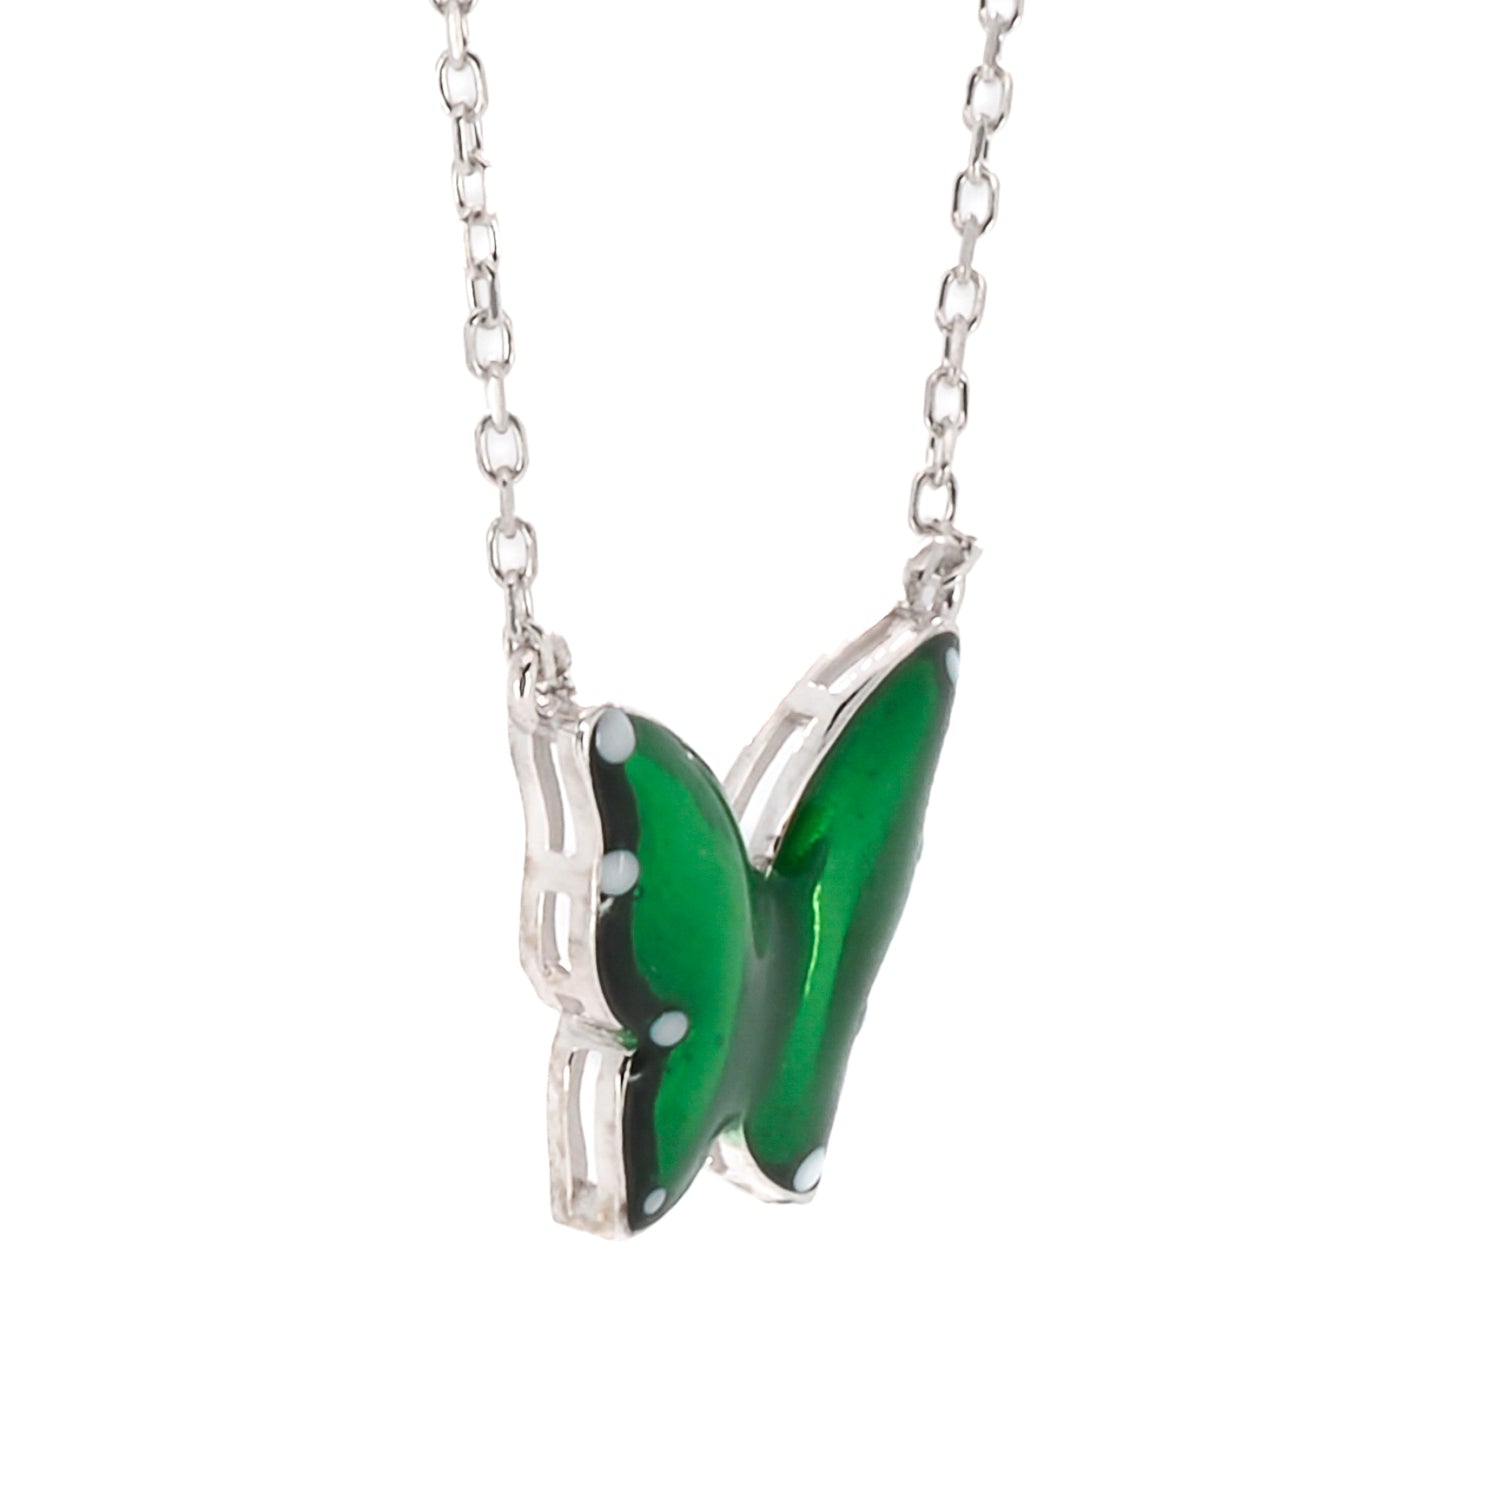 925 Sterling silver  Green enamel Necklace length 16" and 3'' extender